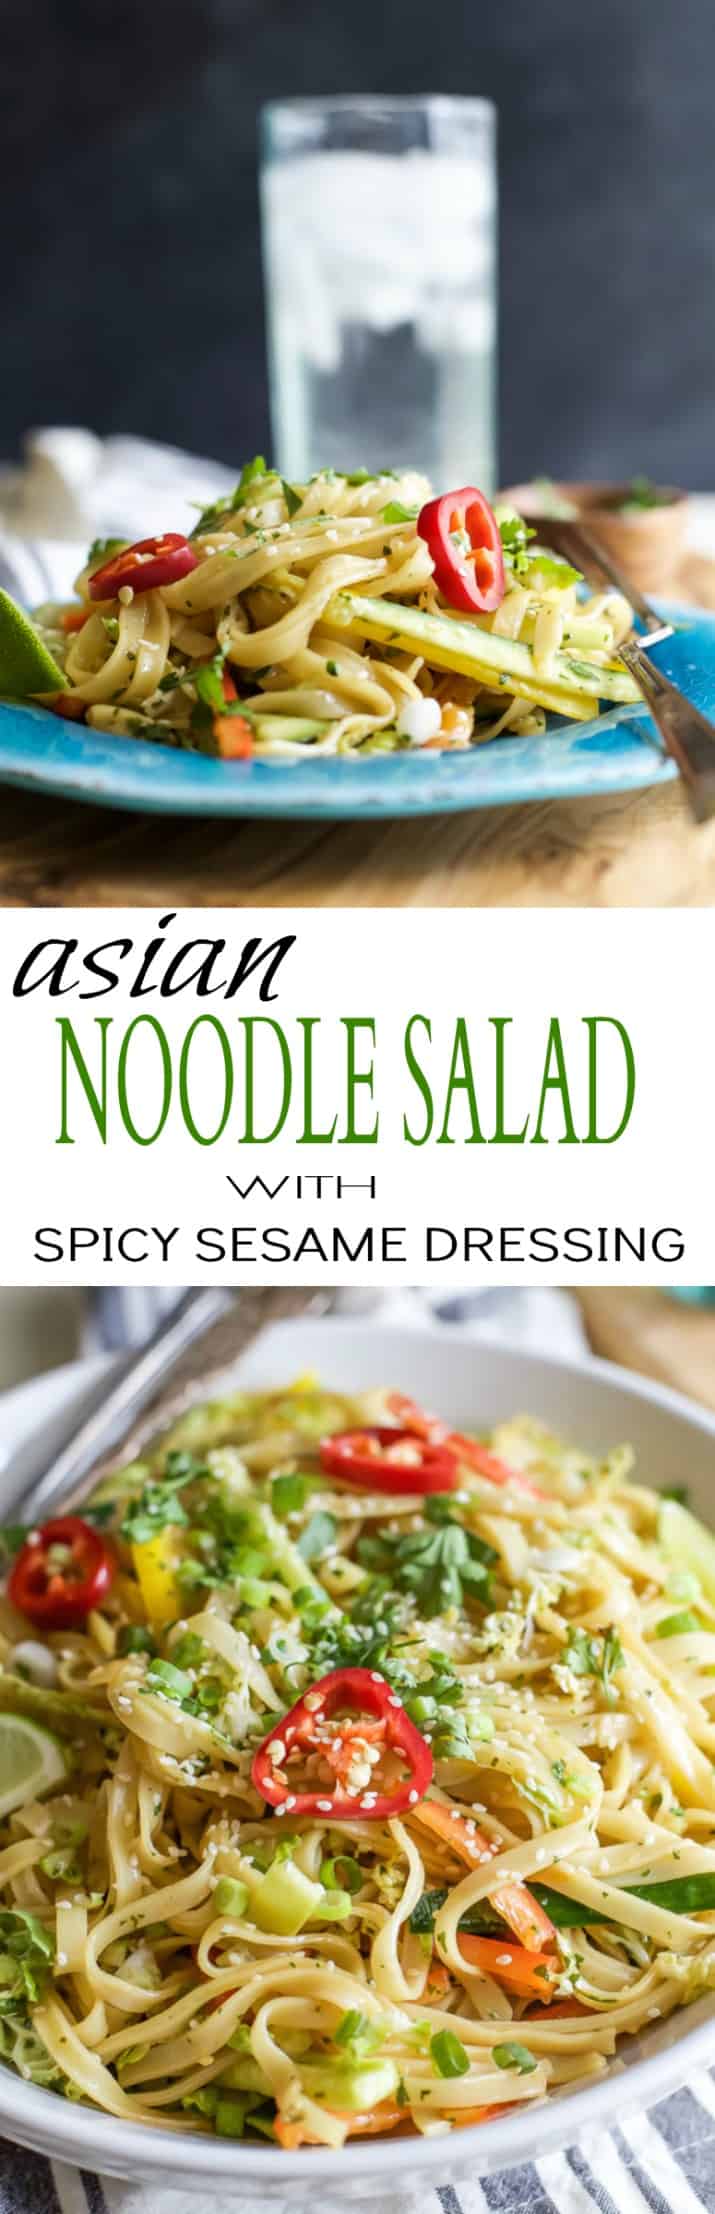 Pinterest image for Asian Noodle Salad with a Spicy Sesame Dressing